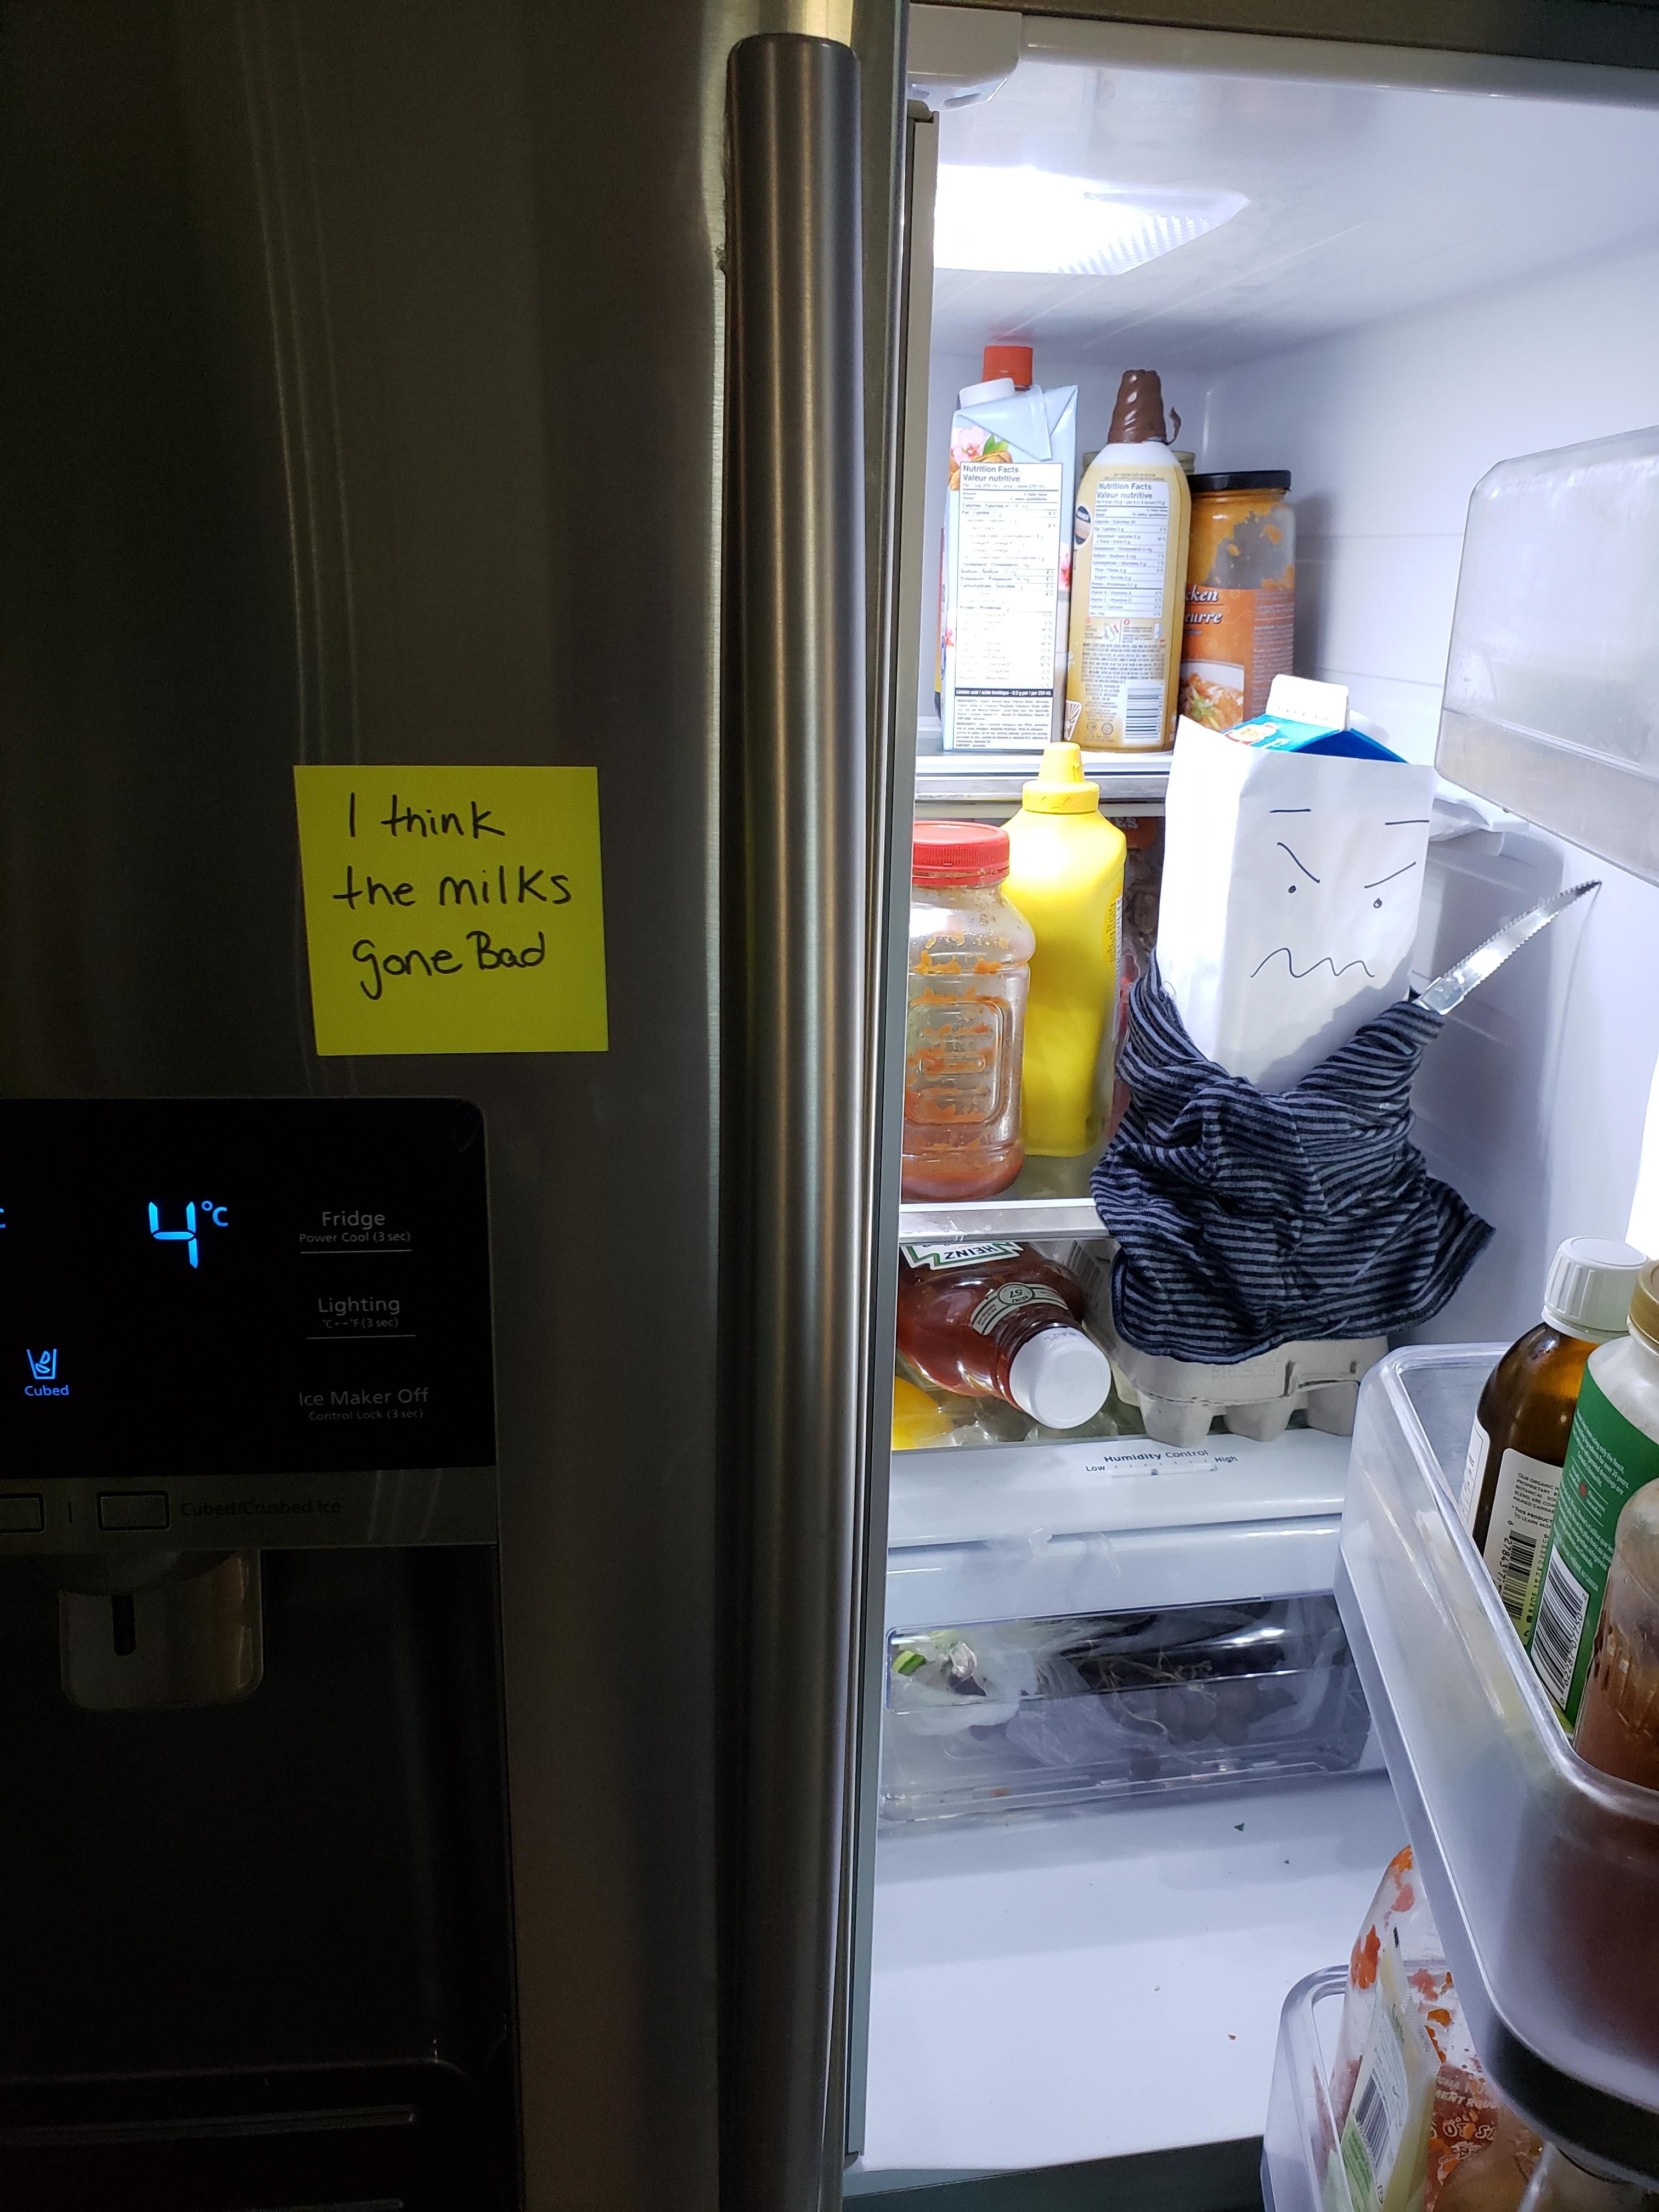 My wife has been waiting for 2 days for me to open fridge. Lol